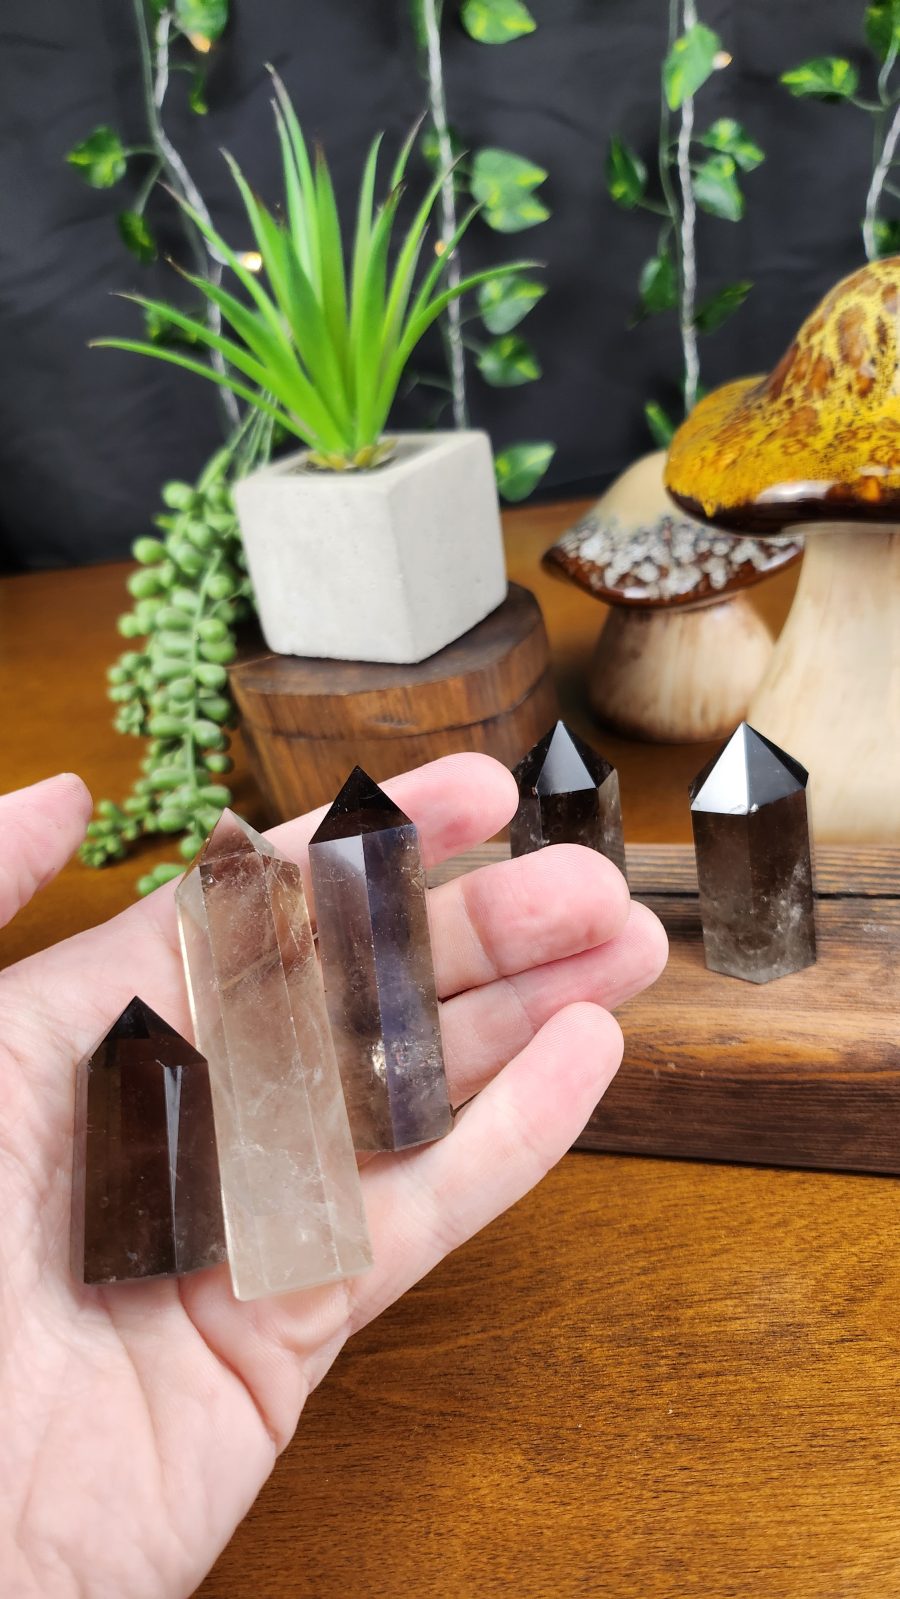 Smokey Quartz crystal points shown in hand for scale.